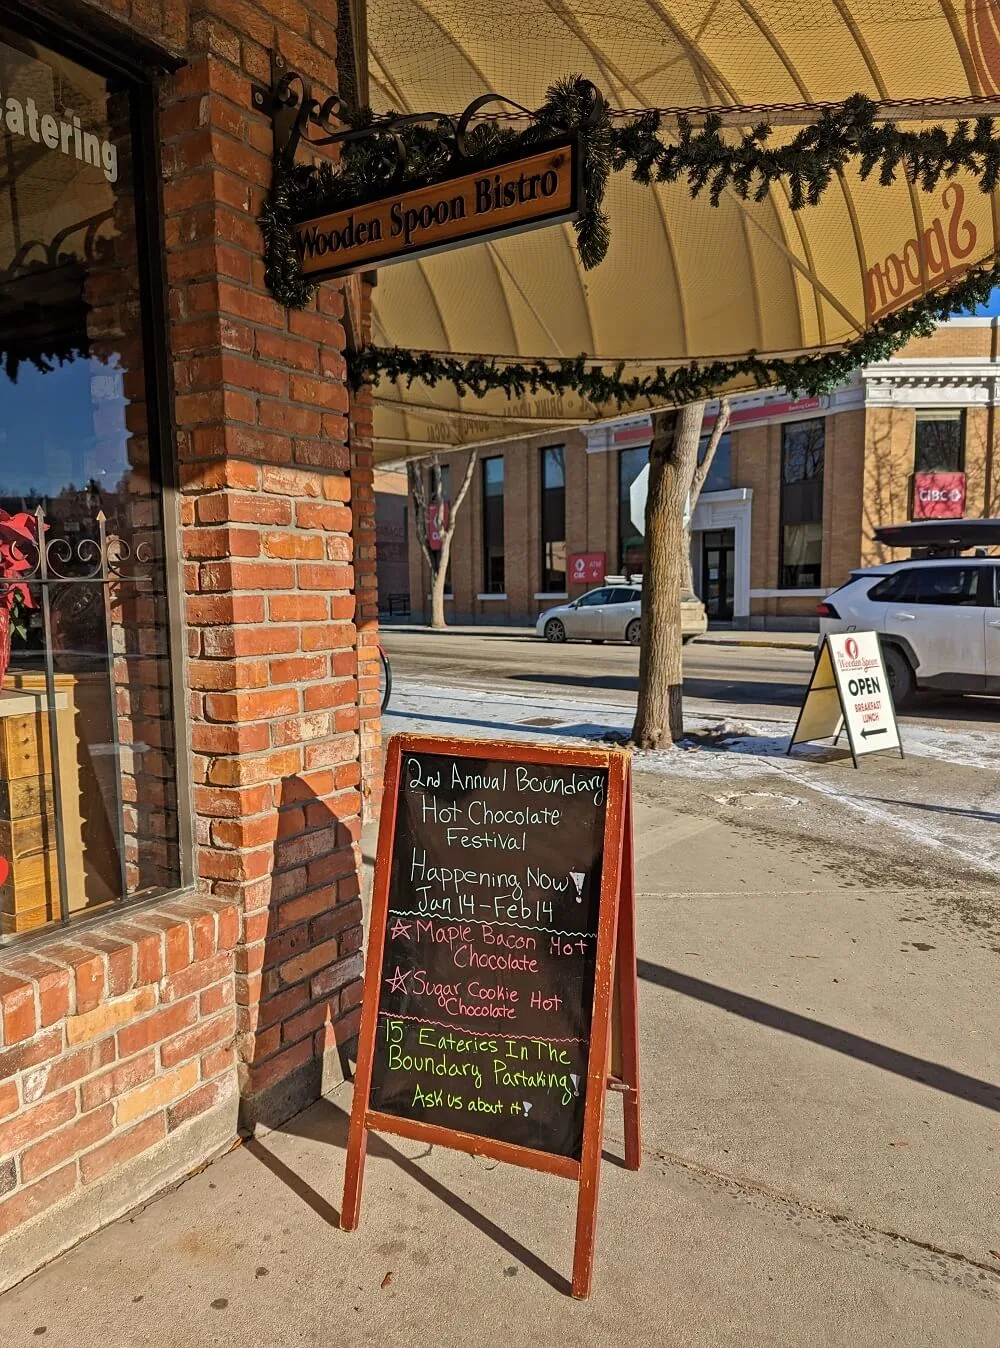 Sandwich board outside of Wooden Spoon Bistro in Grand Forks on a sunny day, promoting the 2nd Annual Hot Chocolate Festival